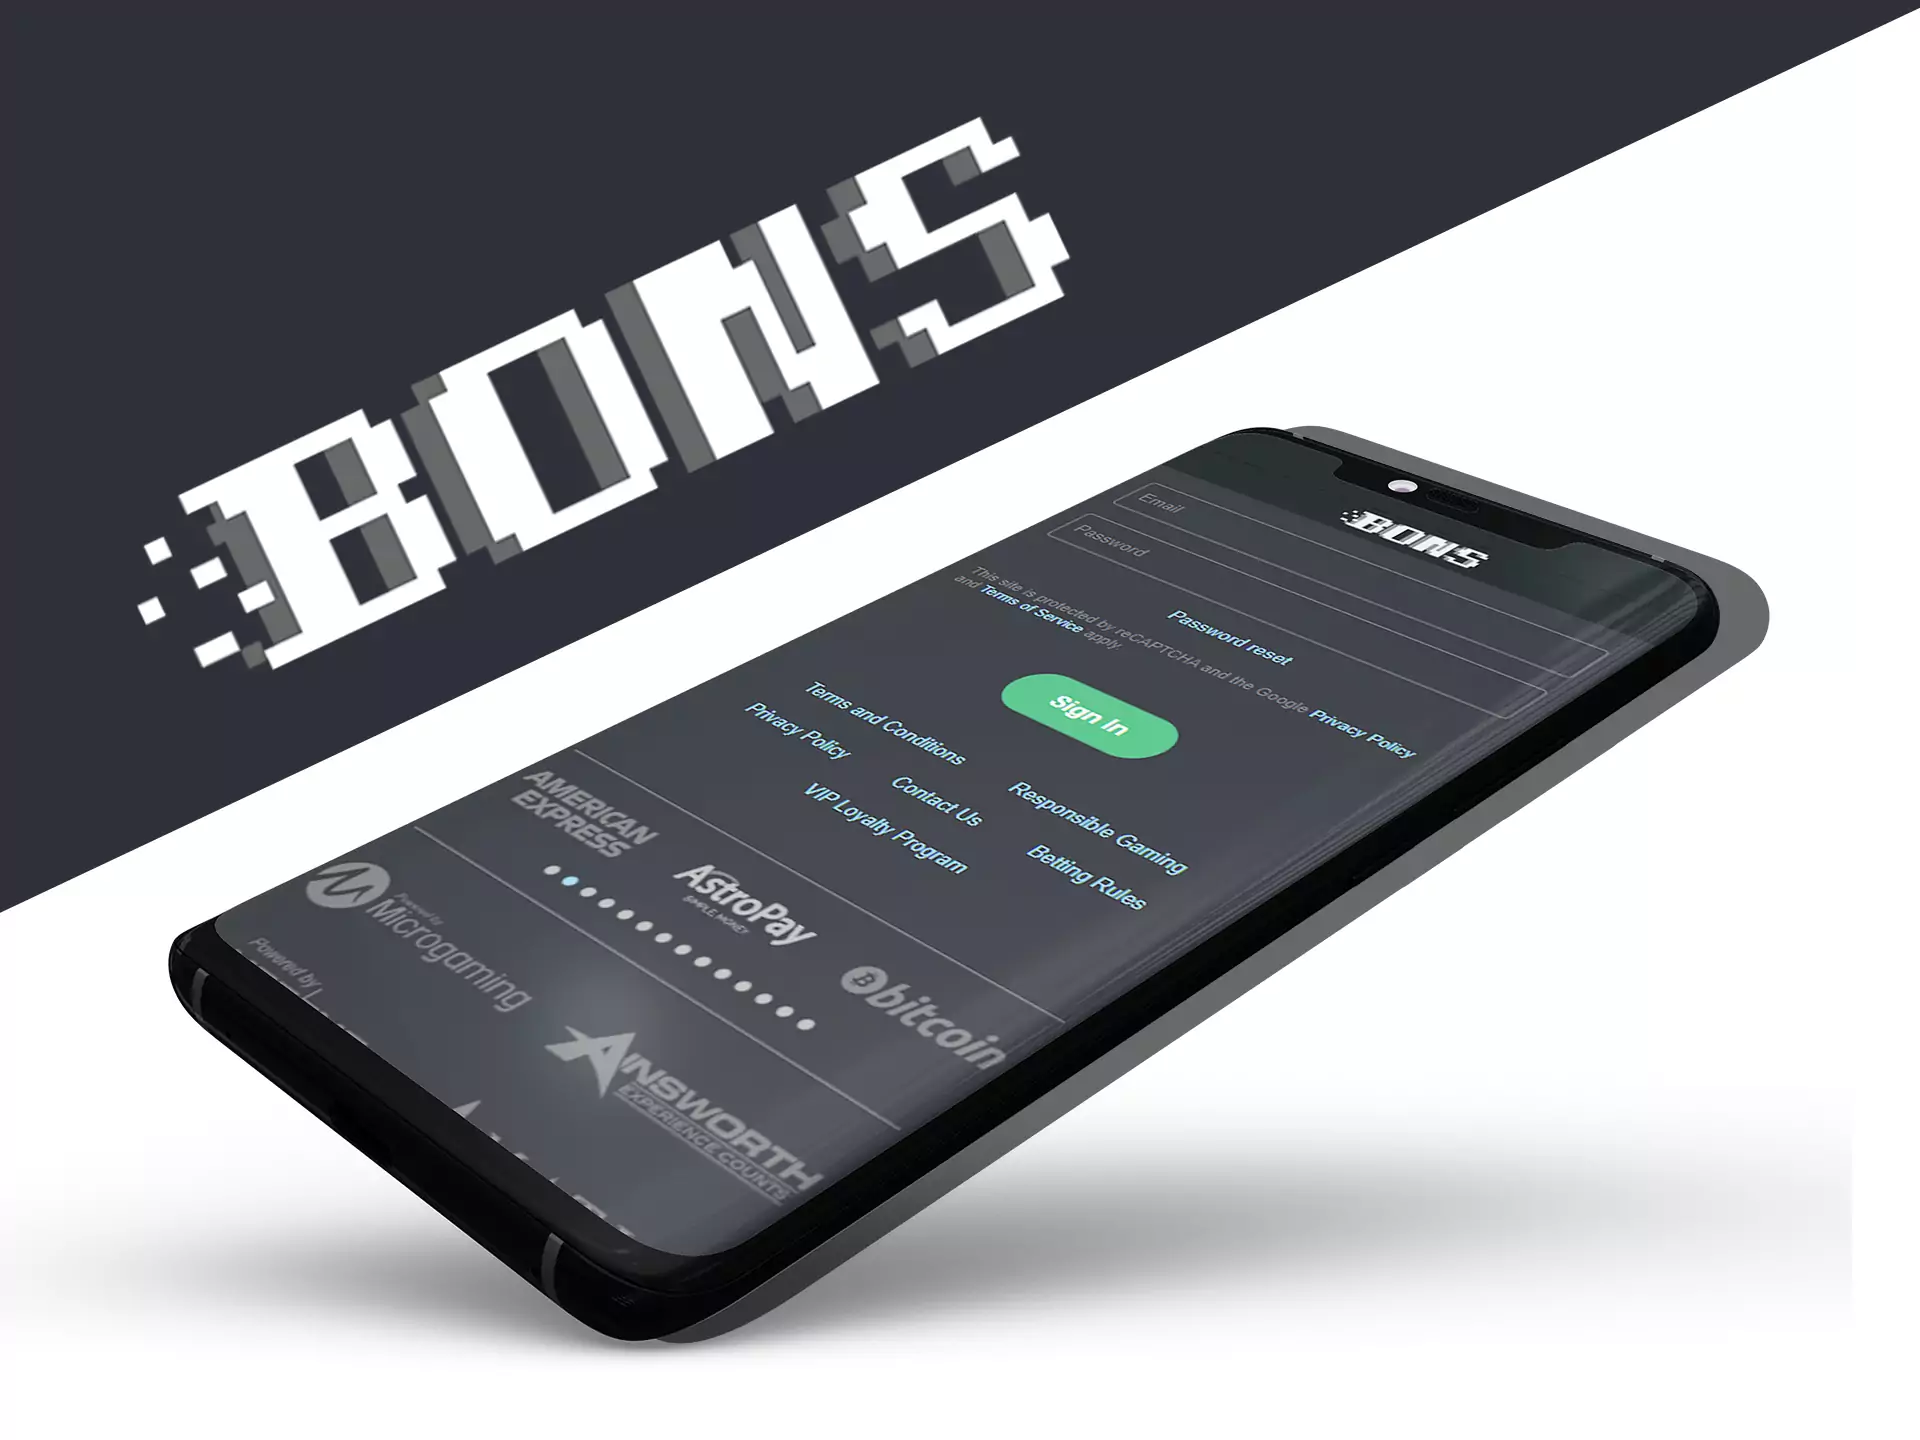 Mobile users can sign up for an account through the Bons app.